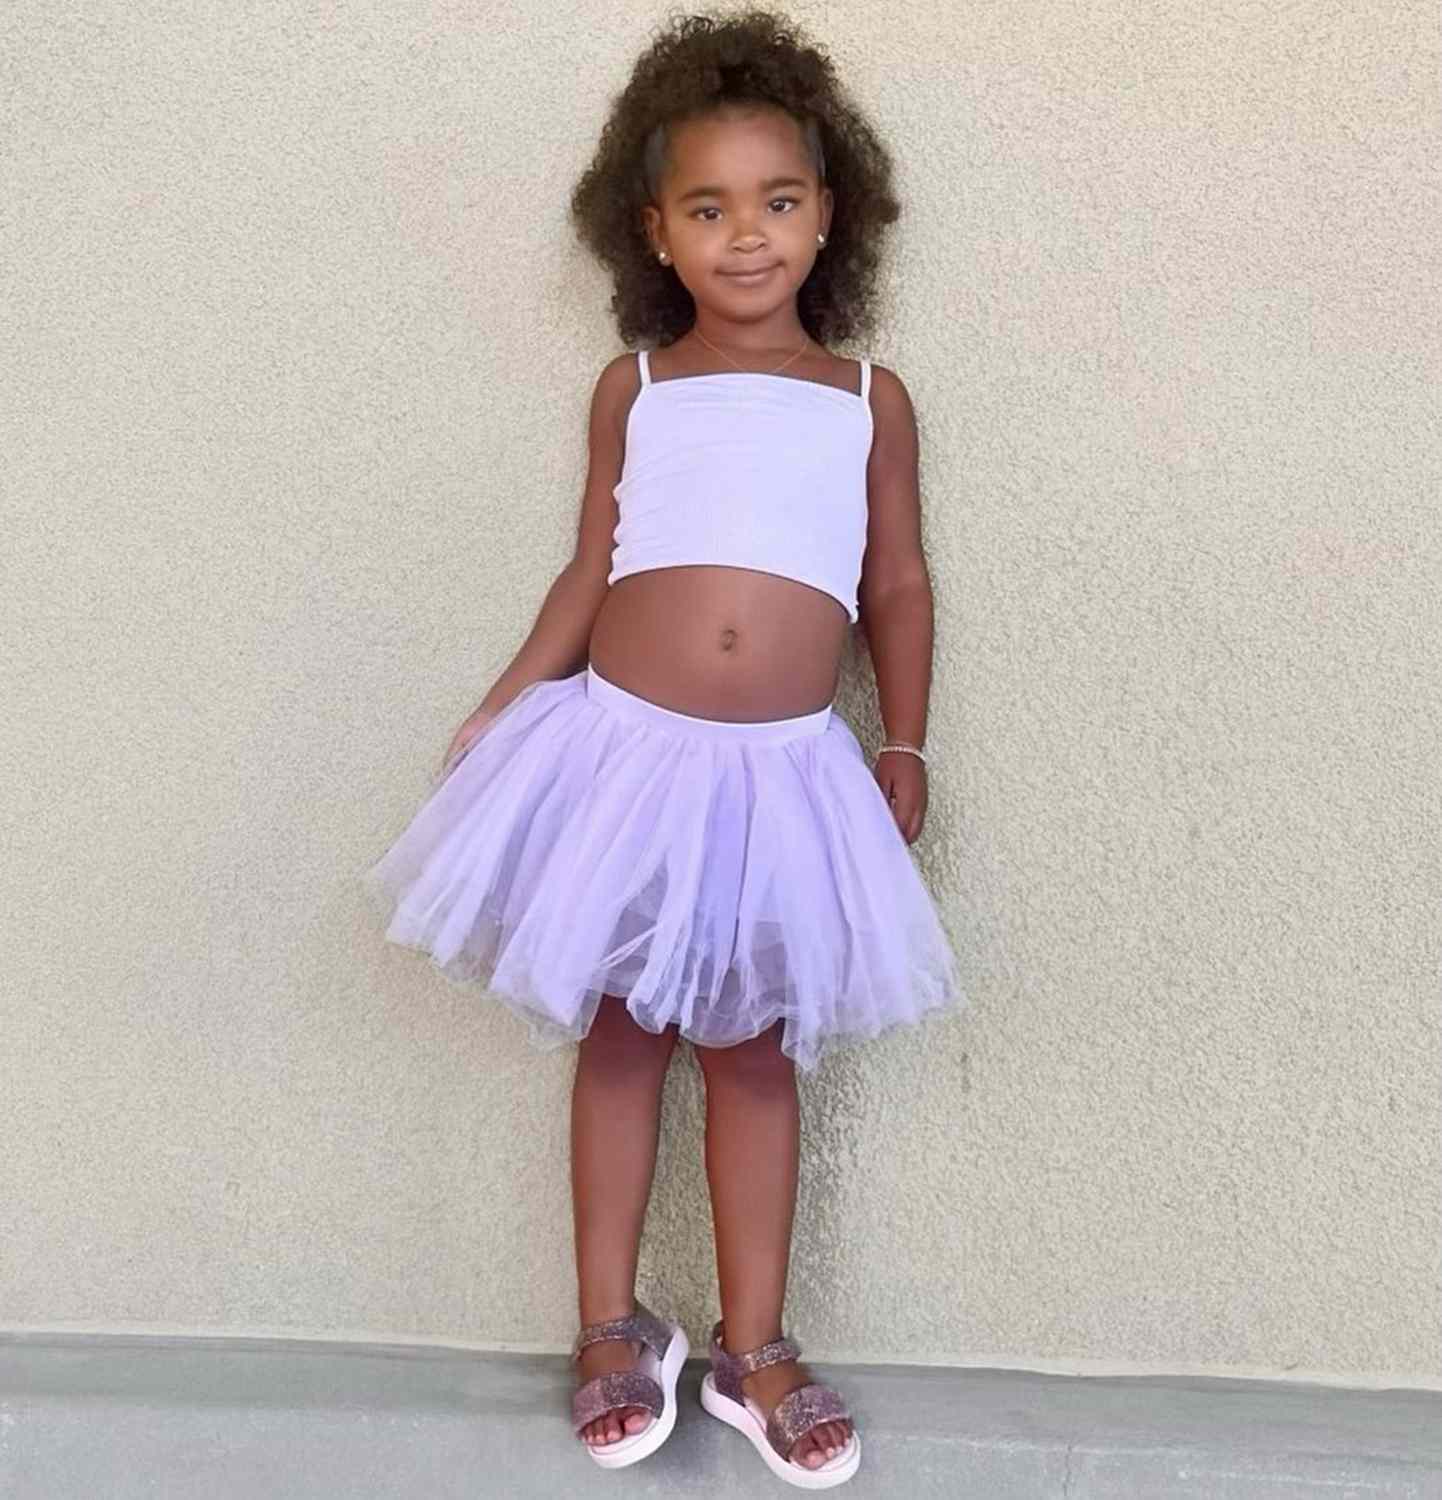 KhloÃ© Kardashian Shares Adorable Pic of True Dressed as a Little Ballerina in a Purple Tutu - Yahoo Entertainment